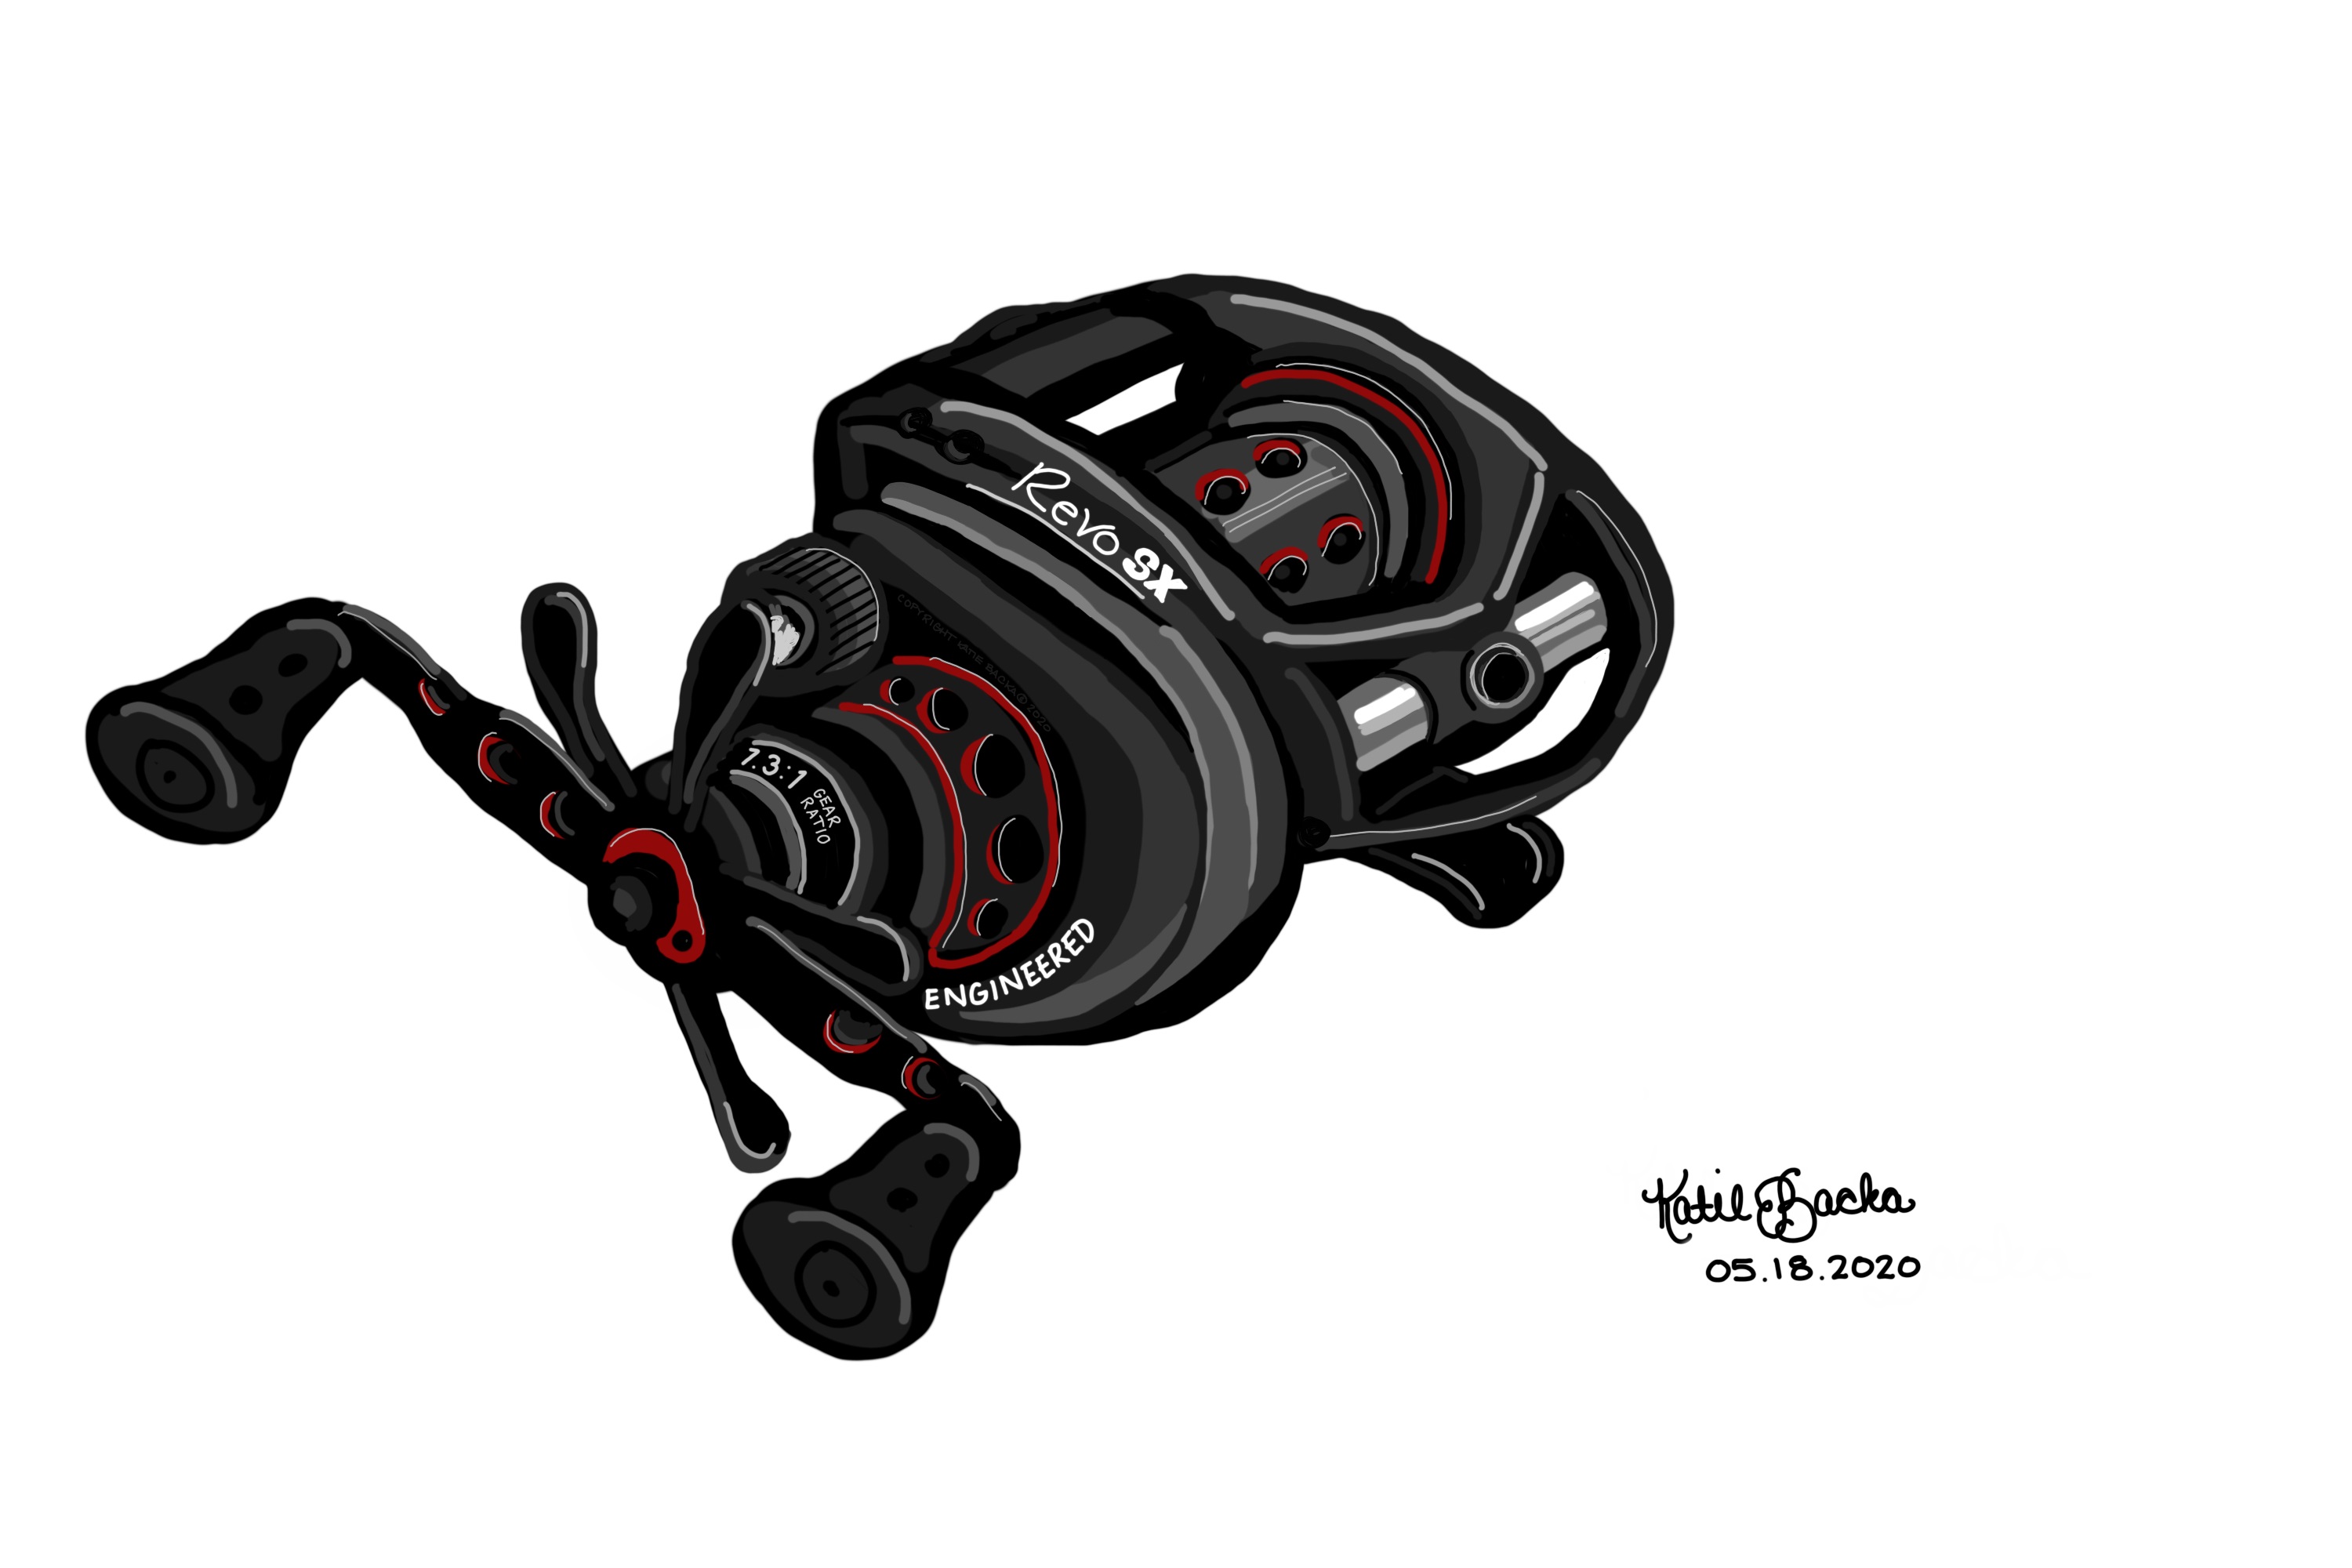 Artwork of a fishing baitcaster drawn by Katie